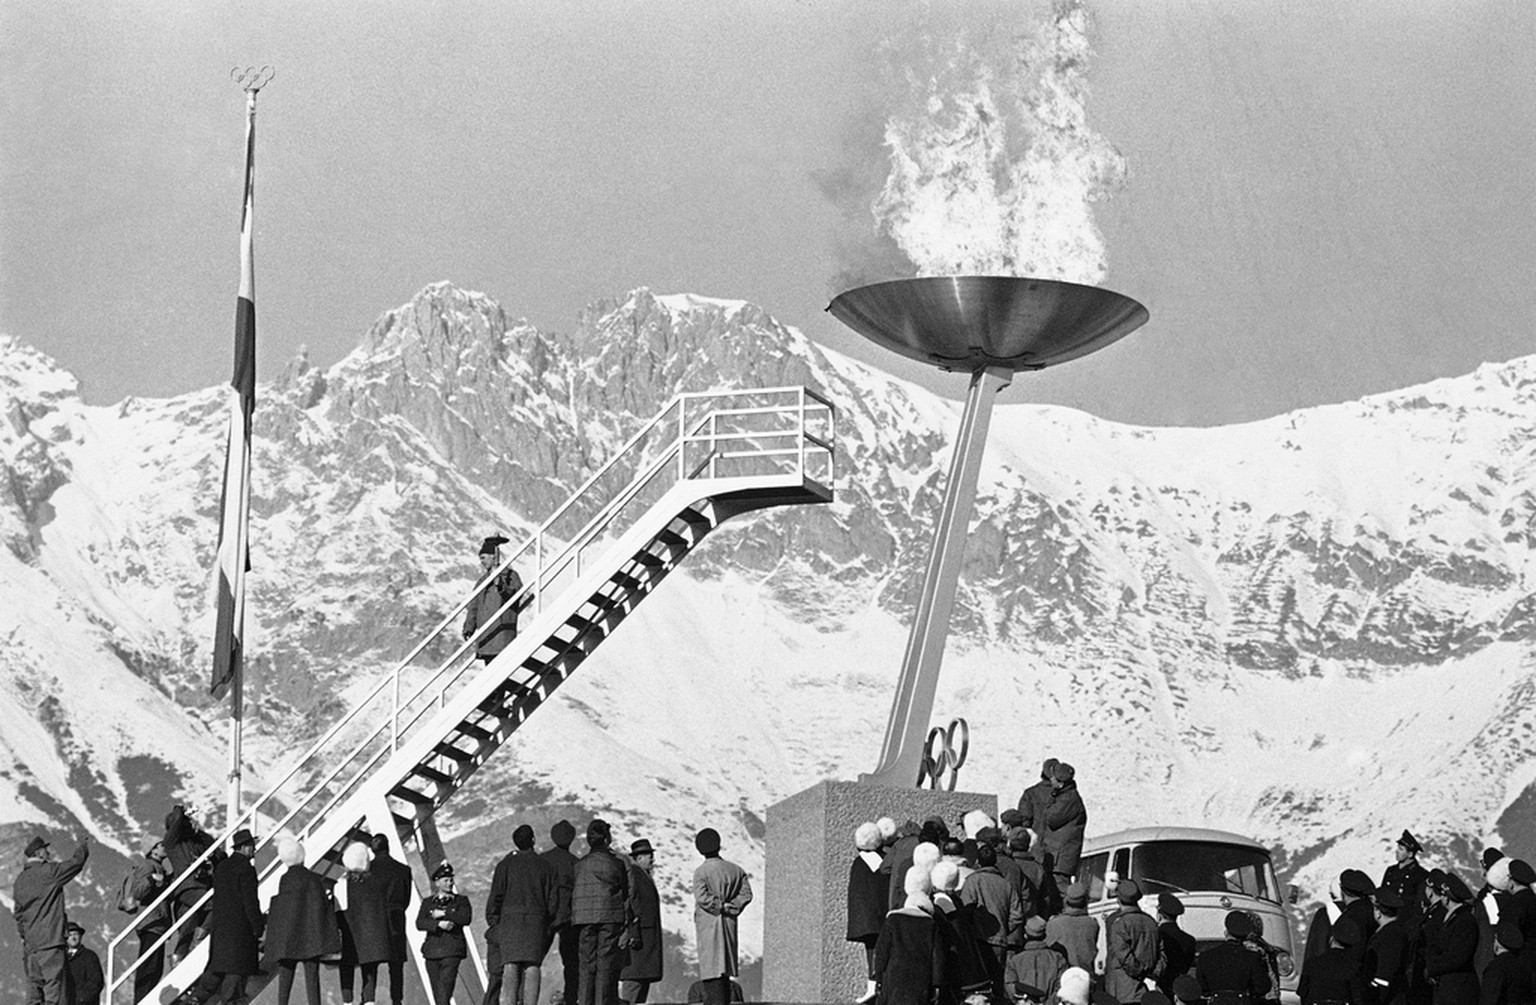 Flames and smoke soar up with a “whoosh” as the Olympic flame is lit at the top of the Olympic Stadium at Innsbruck, Austria on Jan. 21, 1964. The lighting was part of the first rehearsal for the open ...